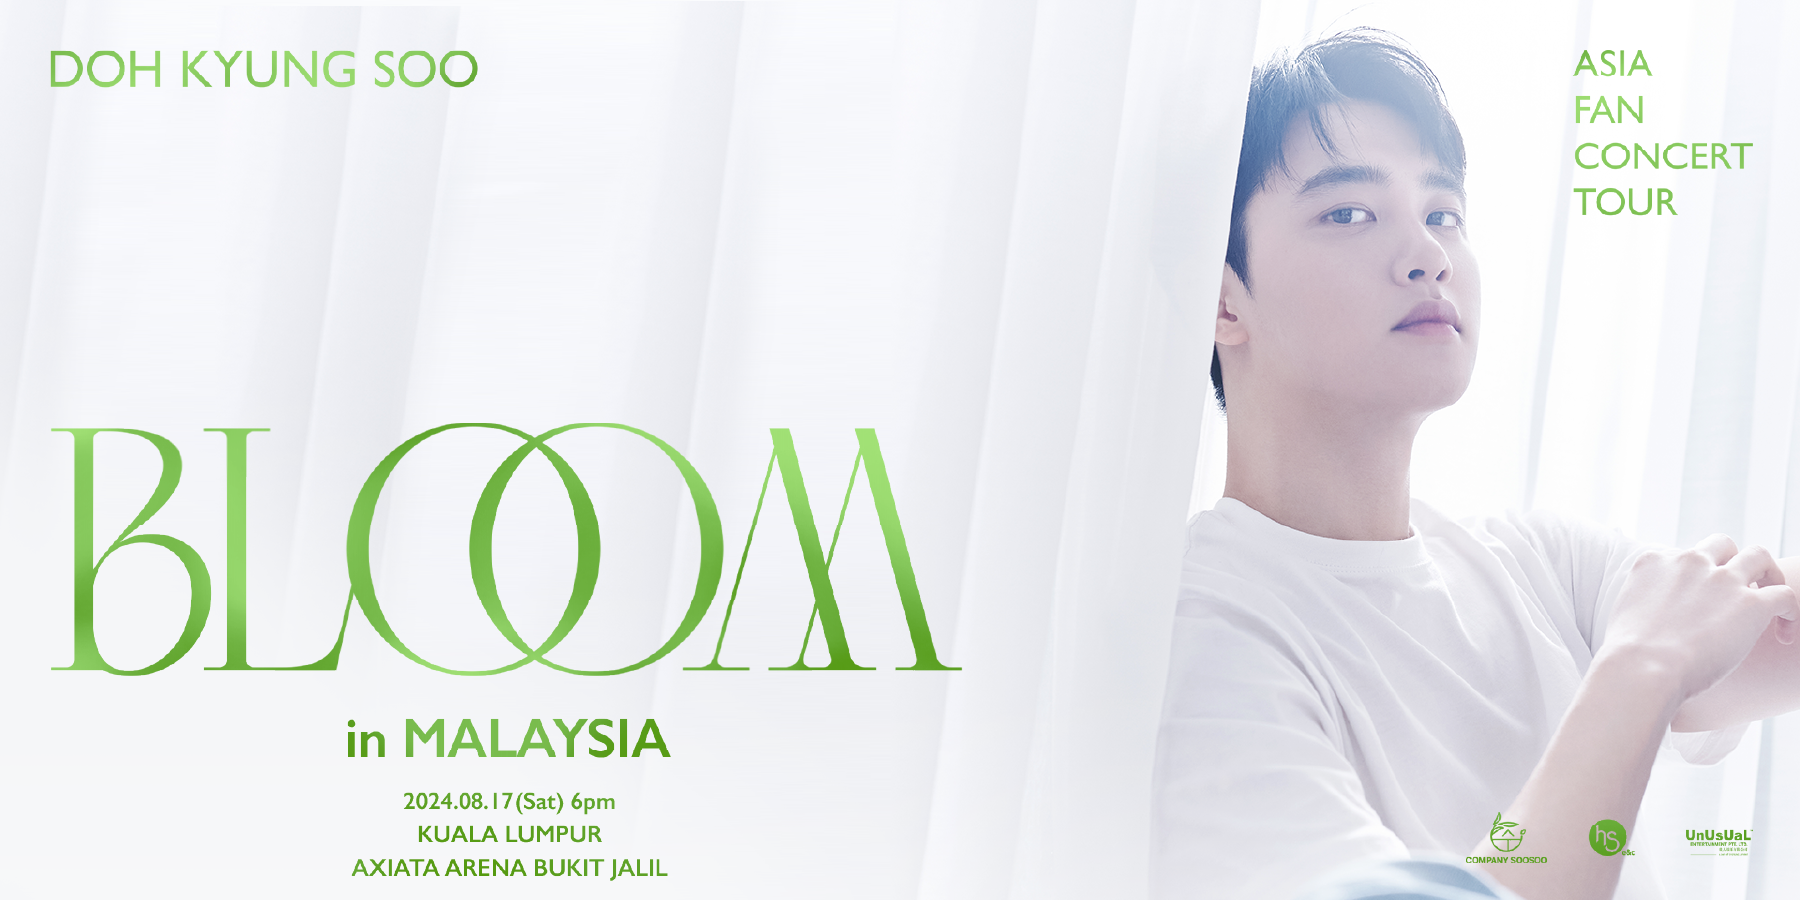 DOH KYUNG SOO ASIA FAN CONCERT TOUR "BLOOM" in MALAYSIA